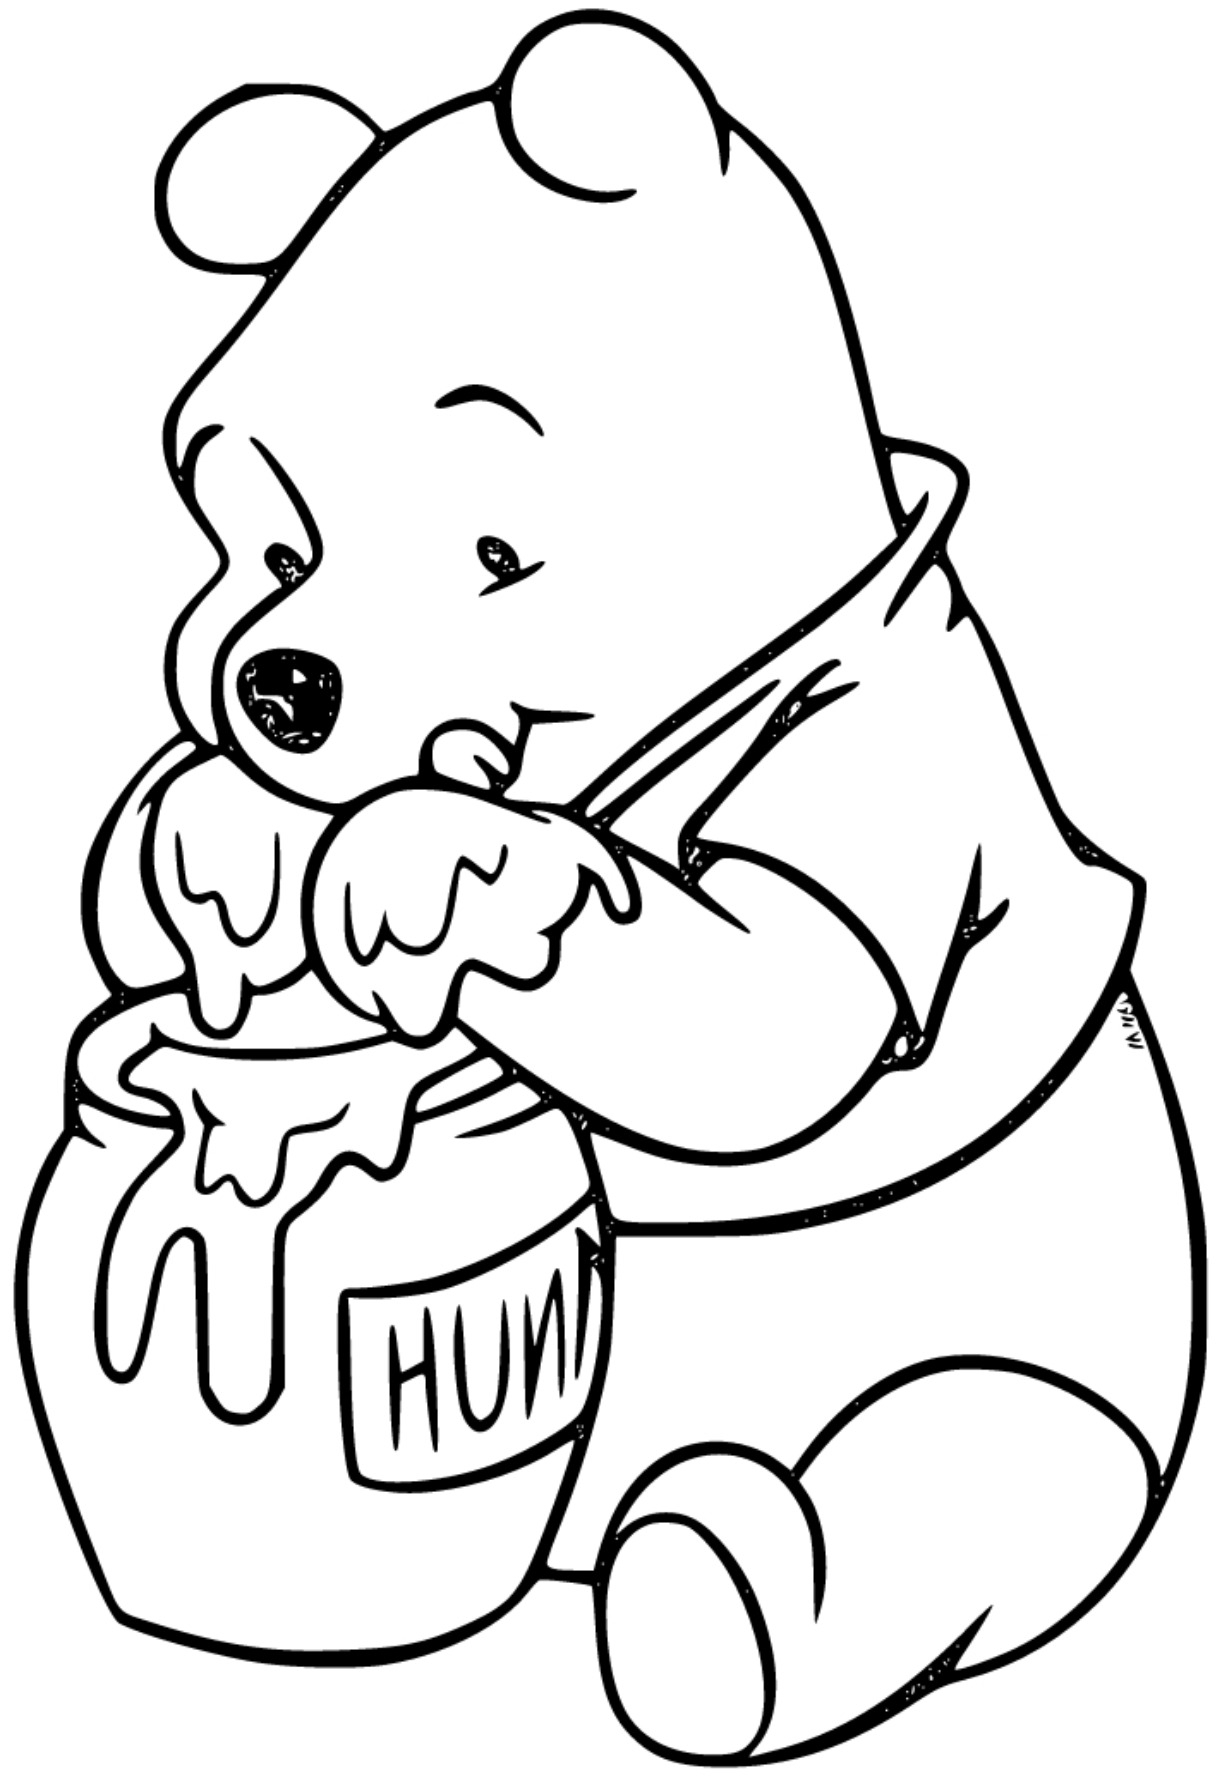 Printable Winnie the Pooh hunny honey Coloring Page for kids.